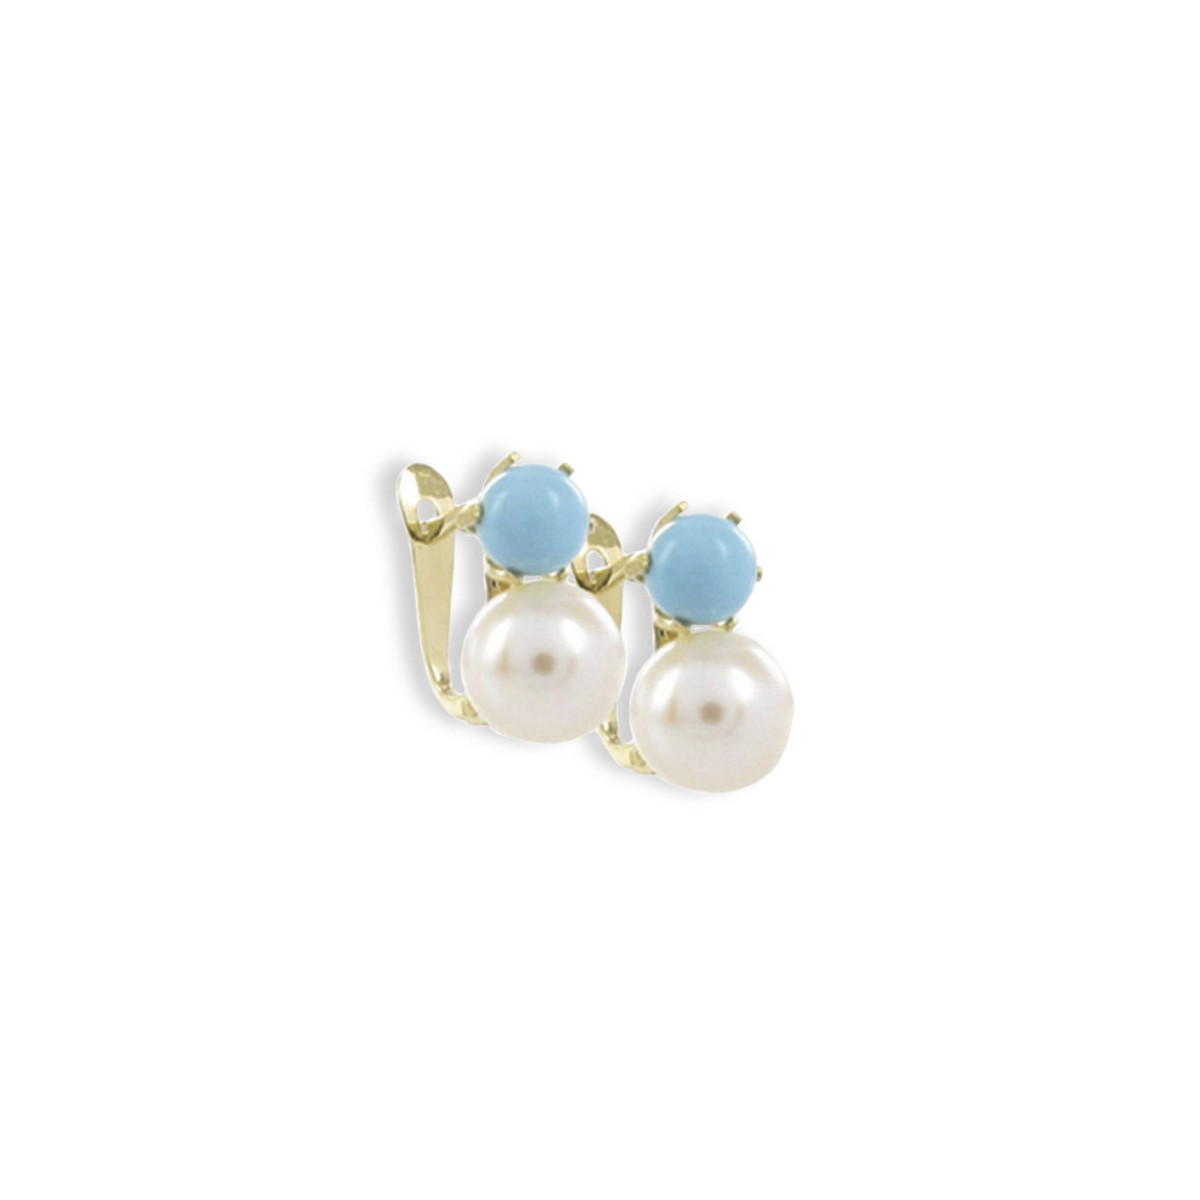 GOLD EARRINGS PEARL AND TURQUOISE